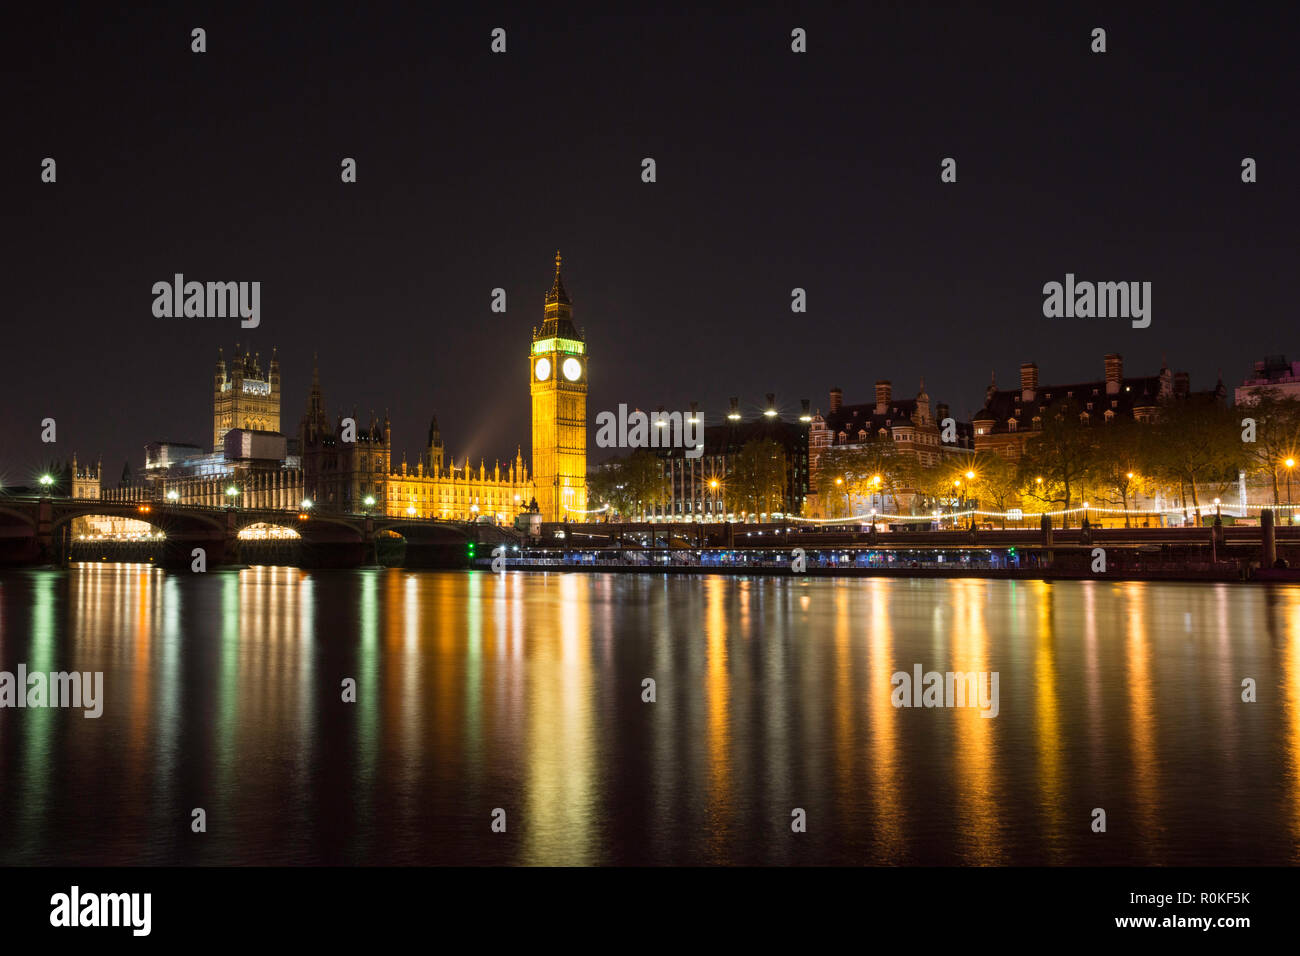 The Houses of Parliament and Big Ben from across the River Thames at night, London, England Stock Photo